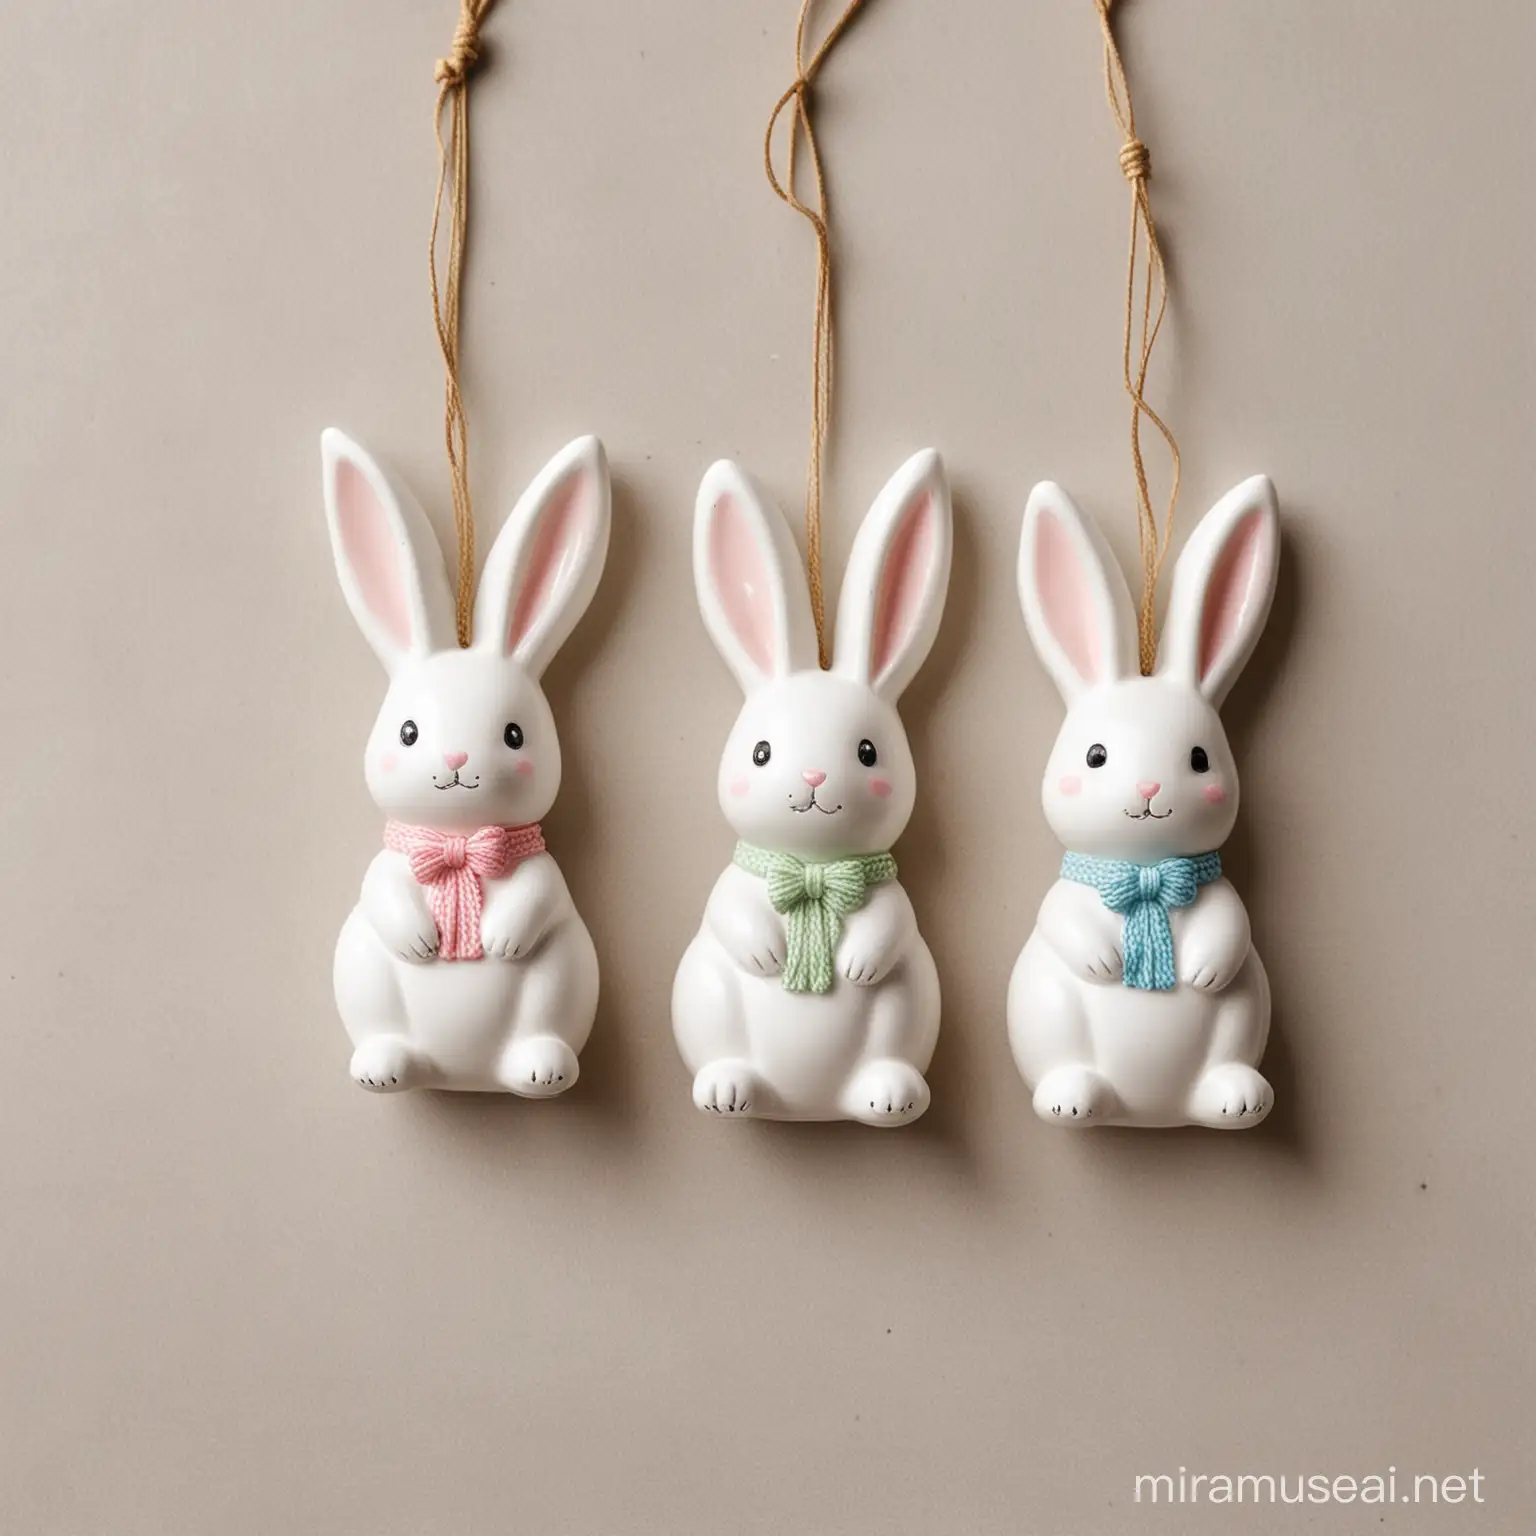 Easter Bunny Themed Ceramic Ornaments on White Background